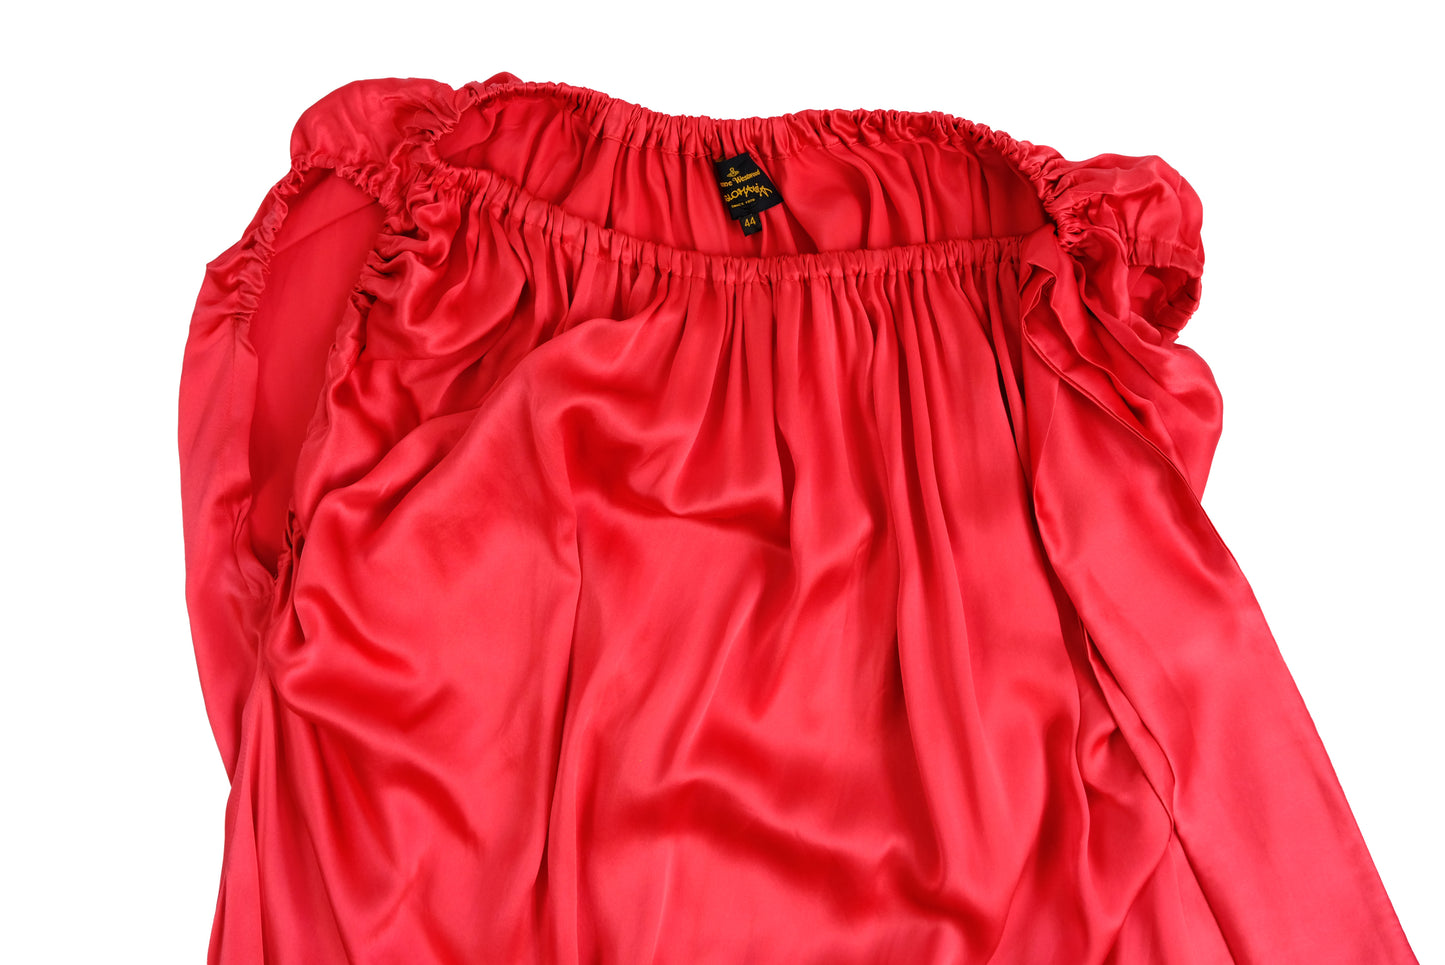 Vivienne Westwood Anglomania Tunic Dress in Red Satin with Bow, UK12-14